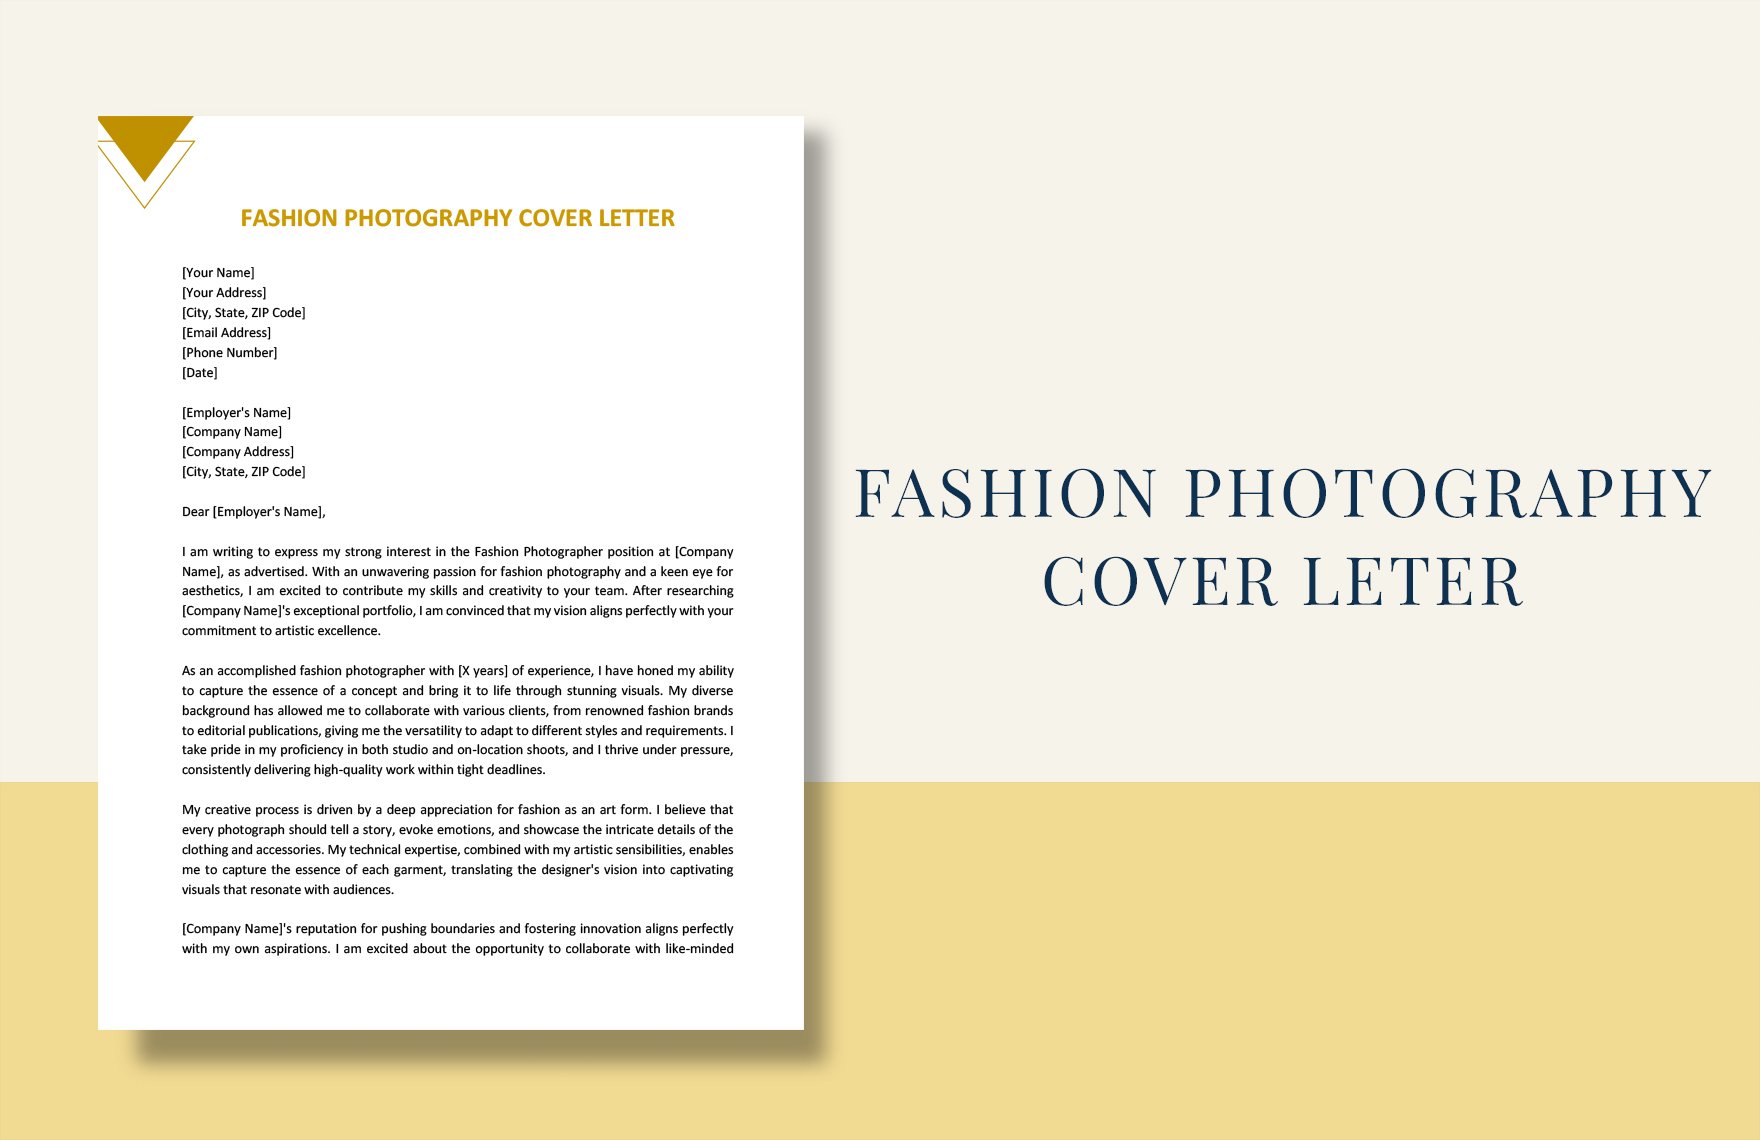 Fashion Photography Cover Letter